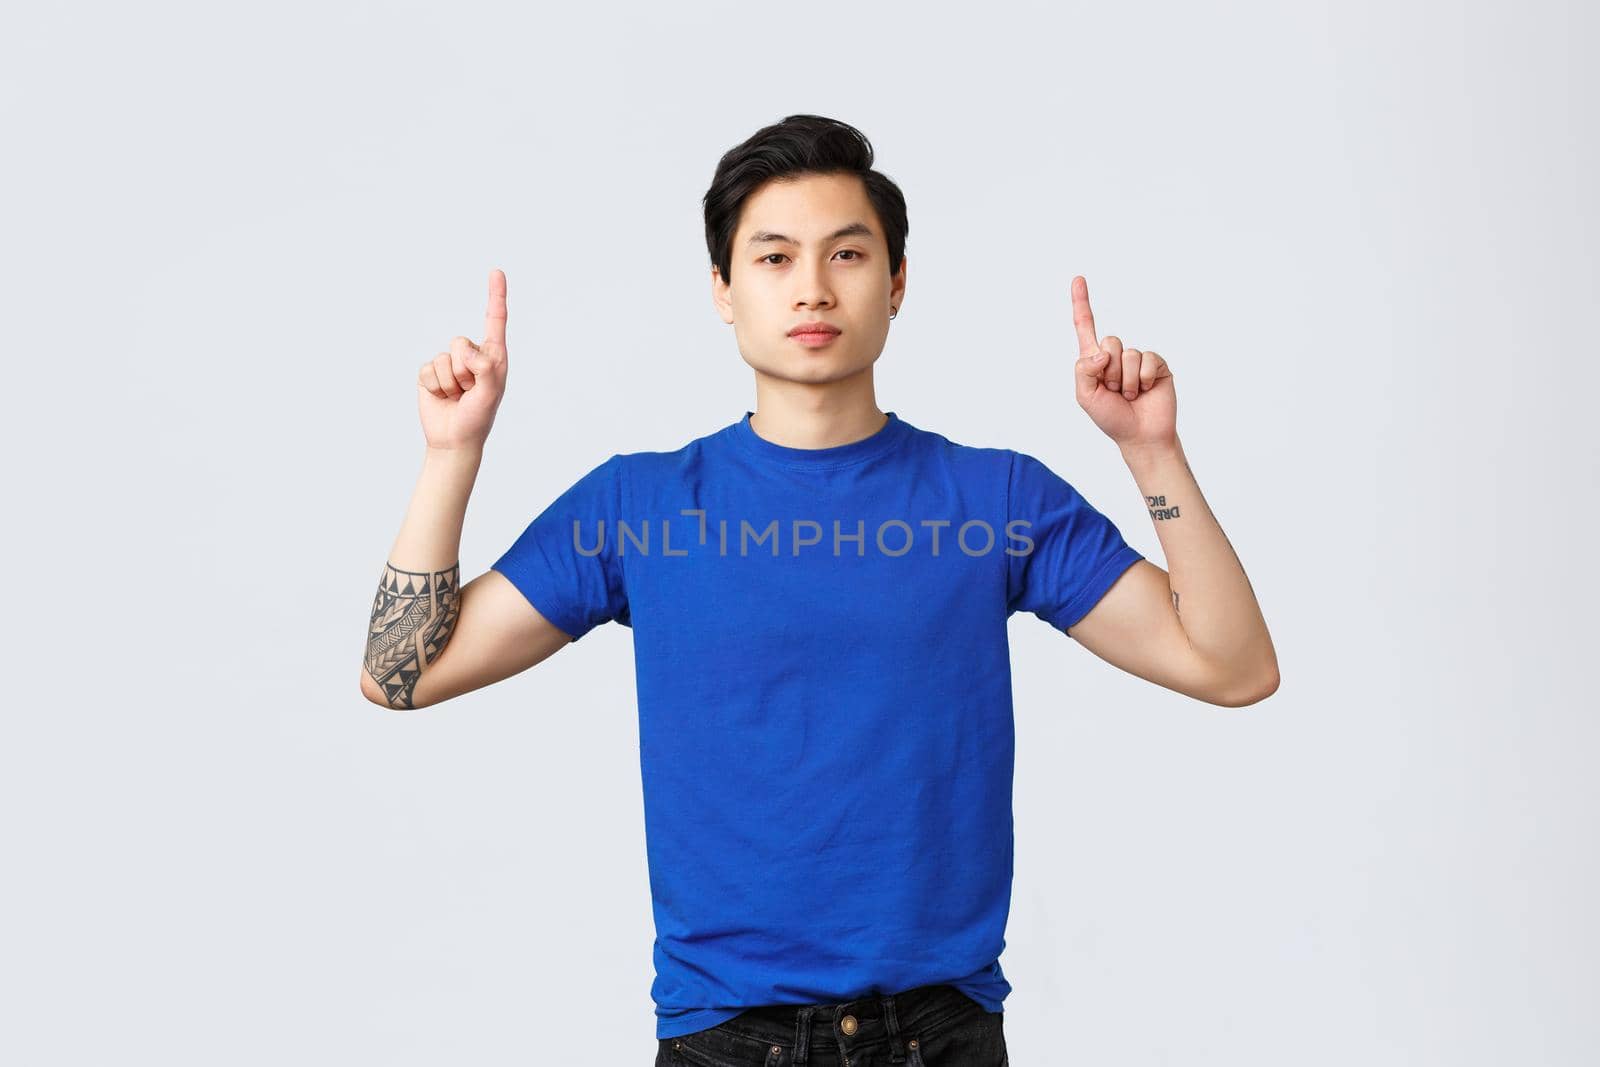 Different emotions, people lifestyle and advertising concept. Confident, serious asian man in blue t-shirt with tattoos, pointing fingers up, inform clients, showing way to banner, grey background.